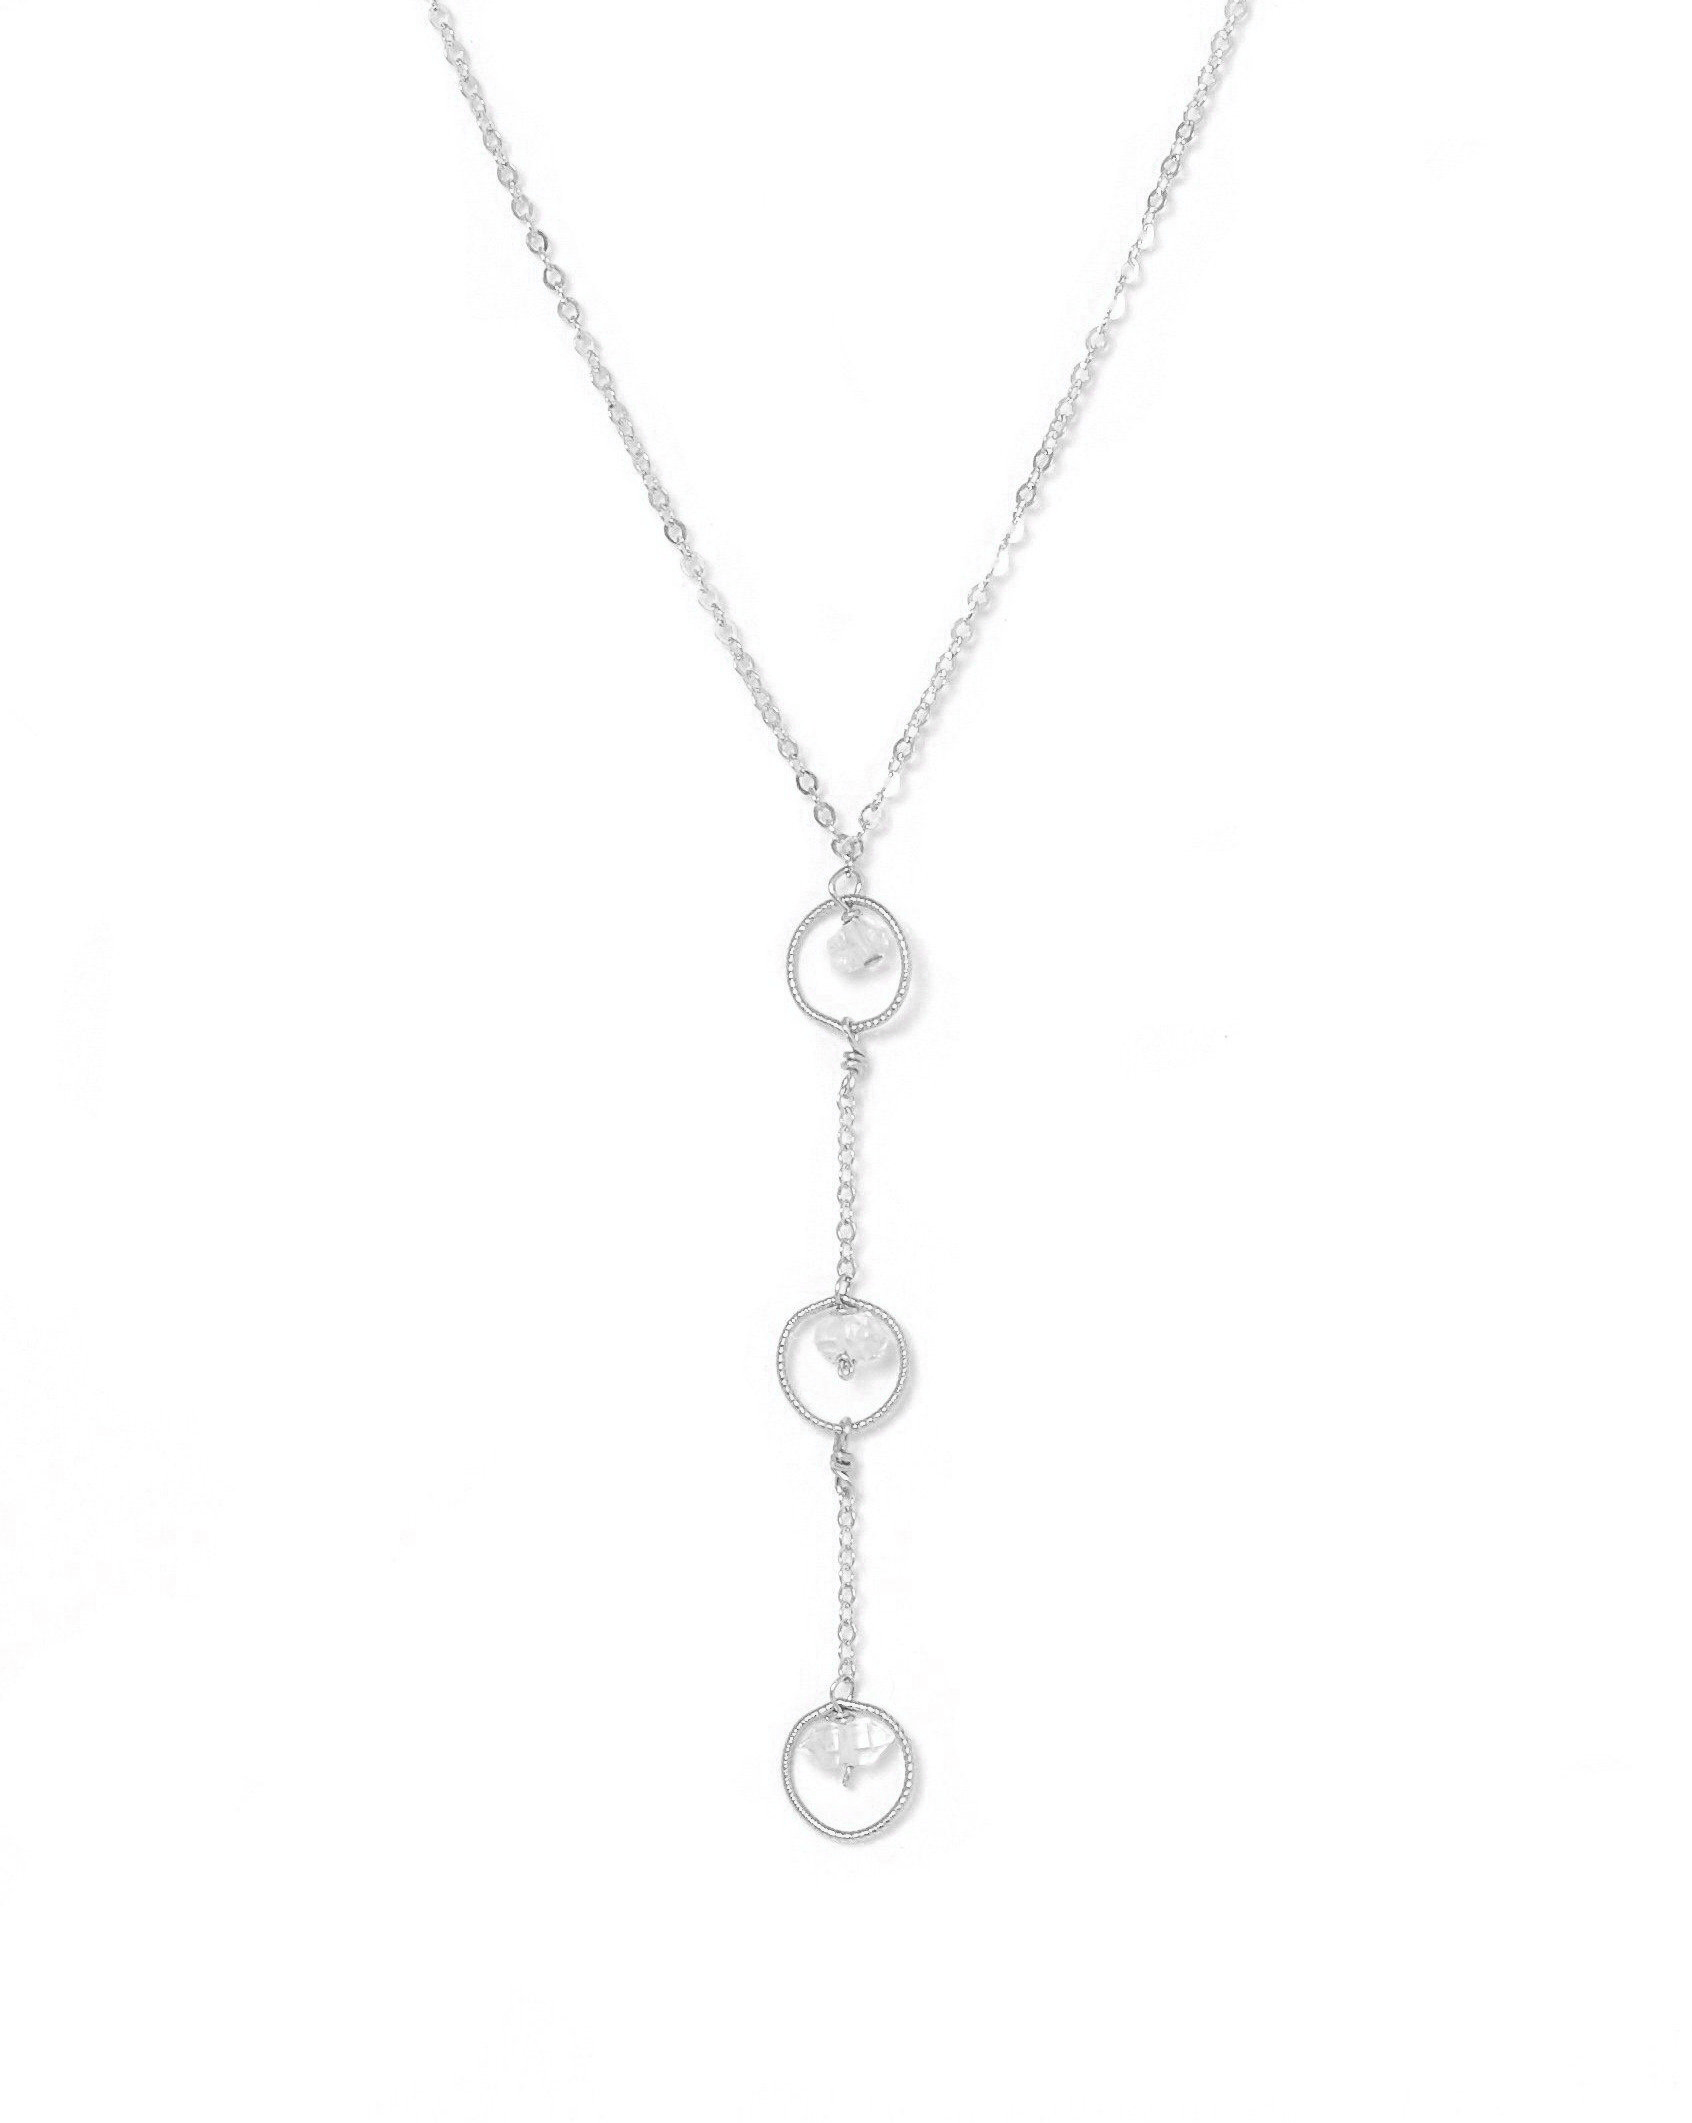 Tre Amos Necklace by KOZAKH. A 16 to 18 inch adjustable length, 1 1/2 inches drop lariat style necklace, crafted in Sterling Silver, featuring Herkimer Diamonds.